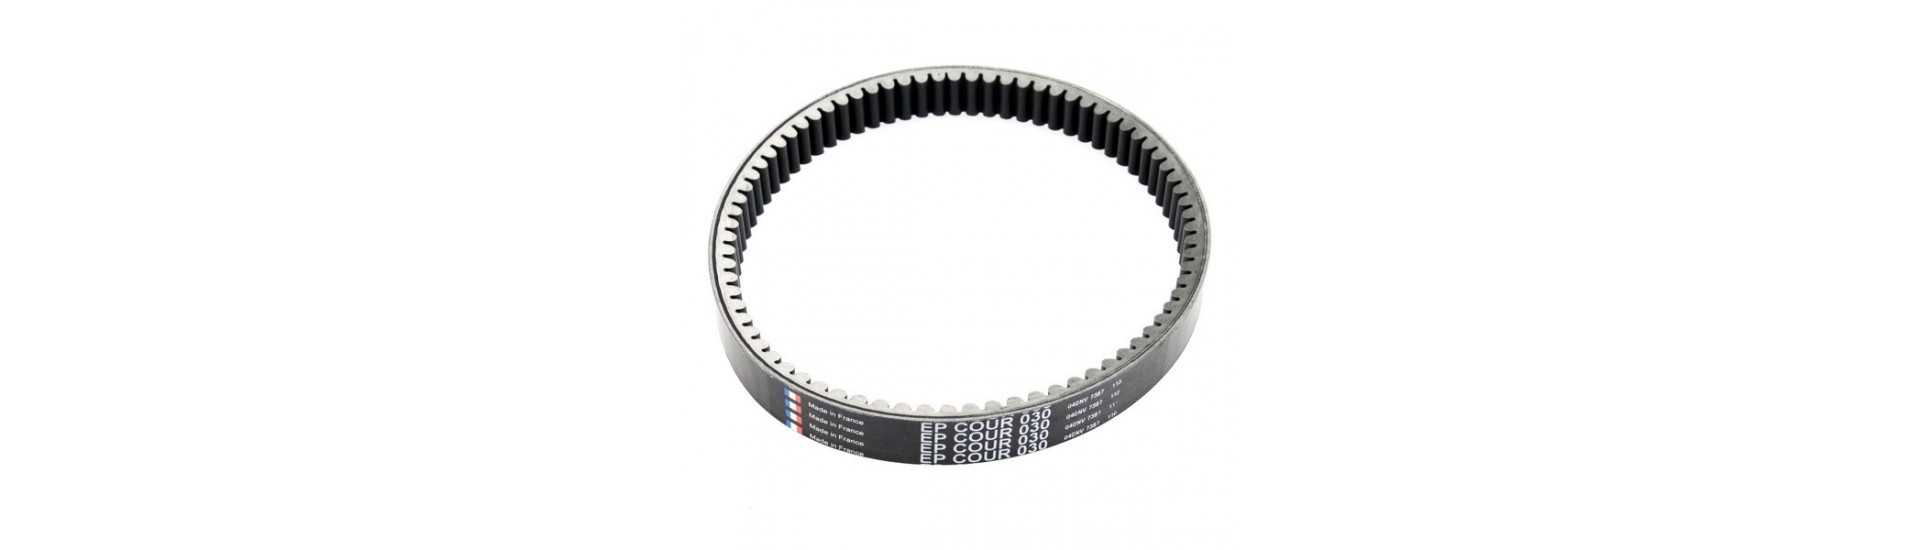 Adaptable variator belt at best price for car without a permit